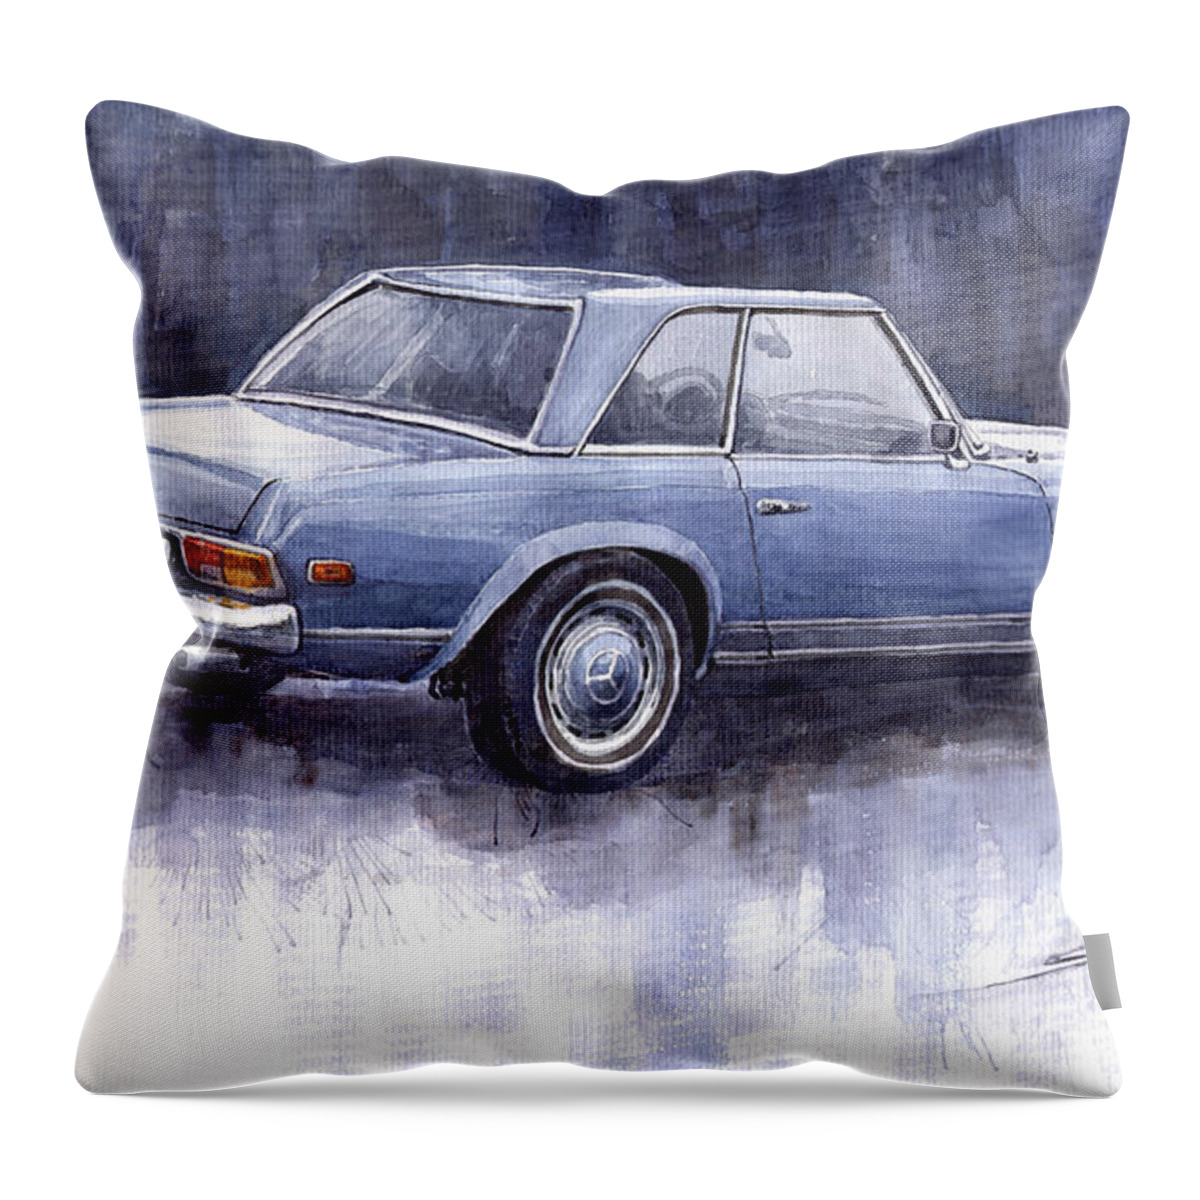 Auto Throw Pillow featuring the painting Mercedes Benz 280 SL W113 Pagoda by Yuriy Shevchuk